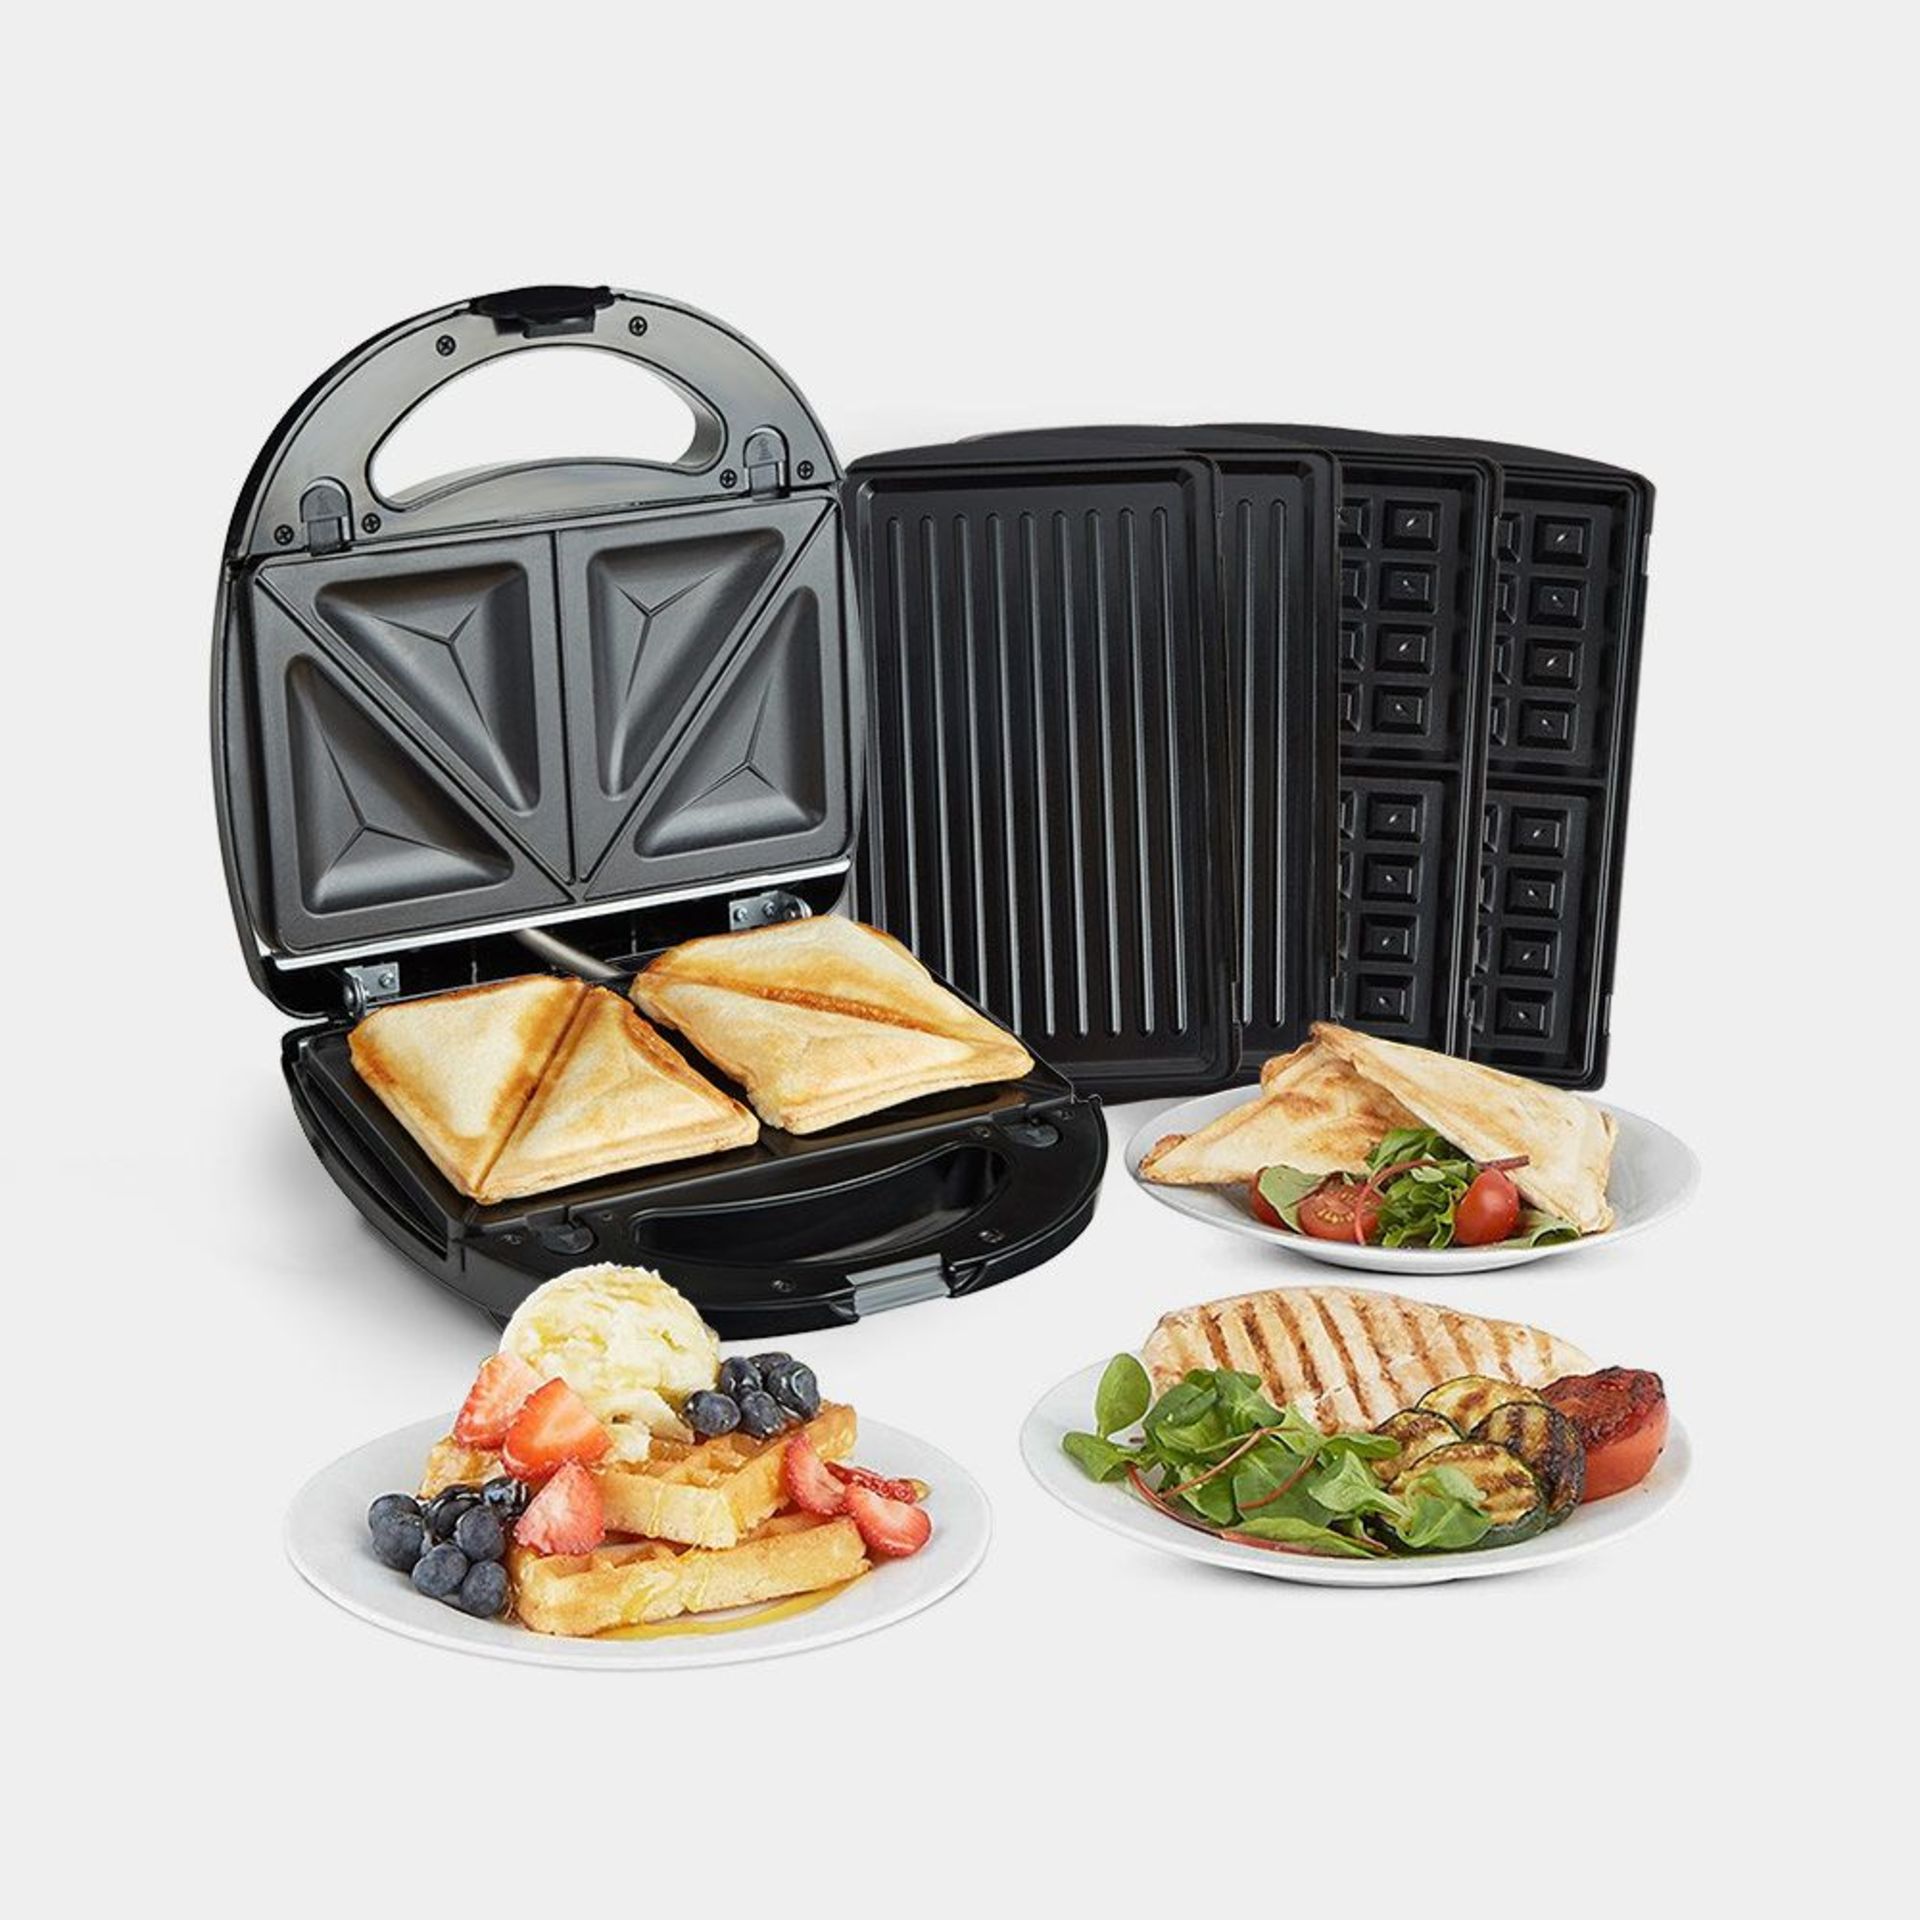 Toastie, Waffle & Panini Maker. When hunger calls, make sure you’re ready to deliver the tasty goods